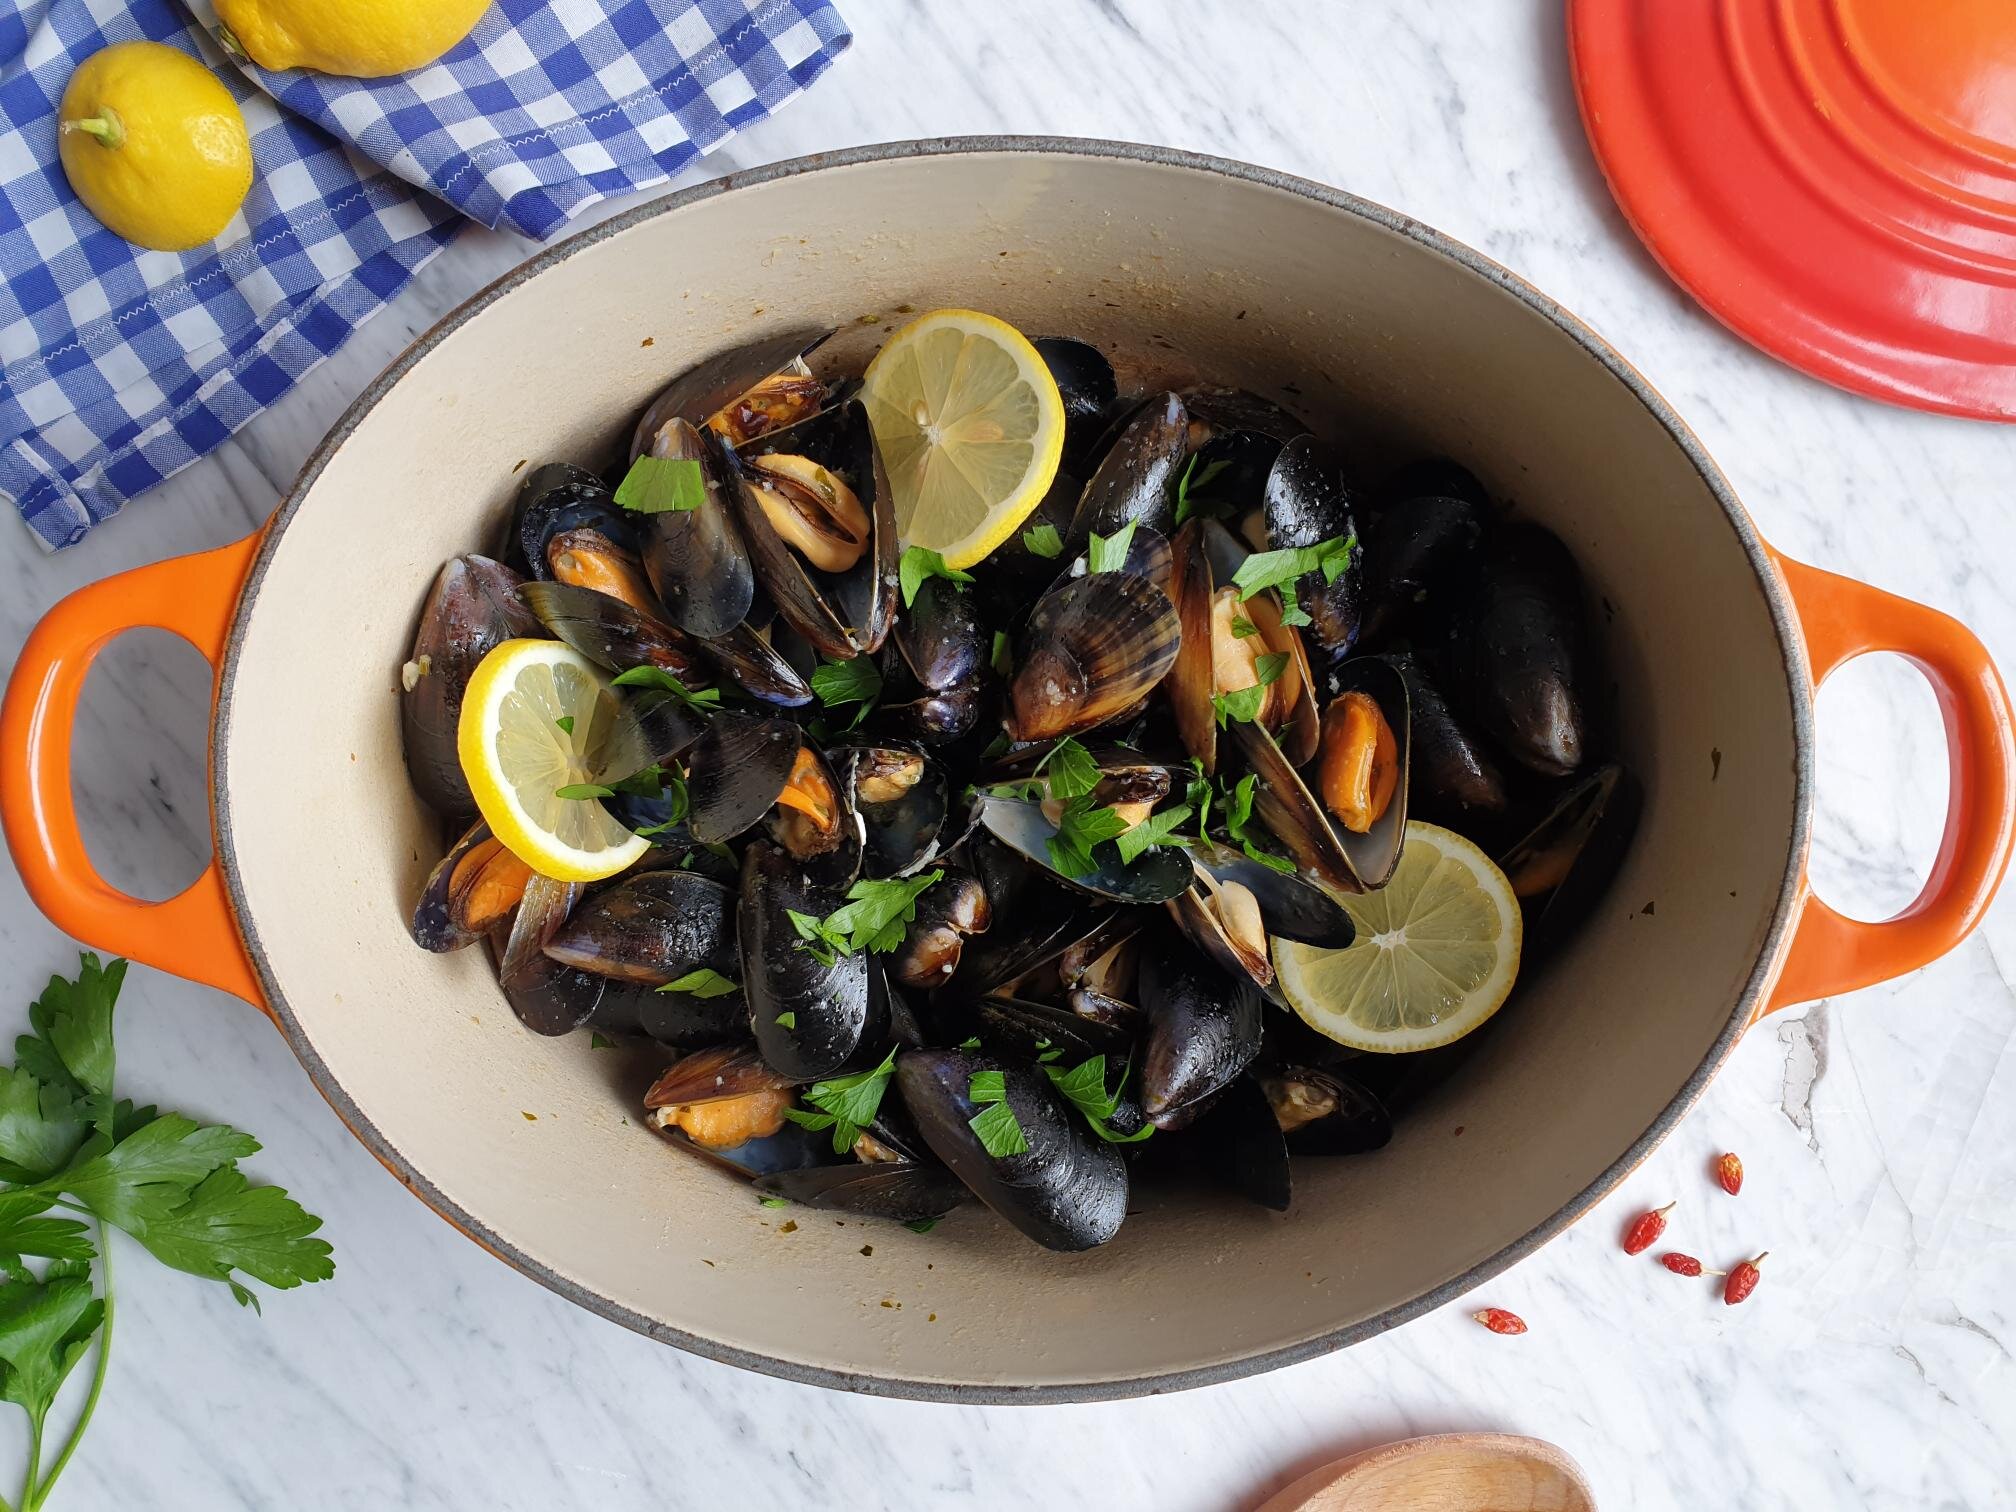 Mussels buzara style with garlic, parsley and white wine Istrian Recipe